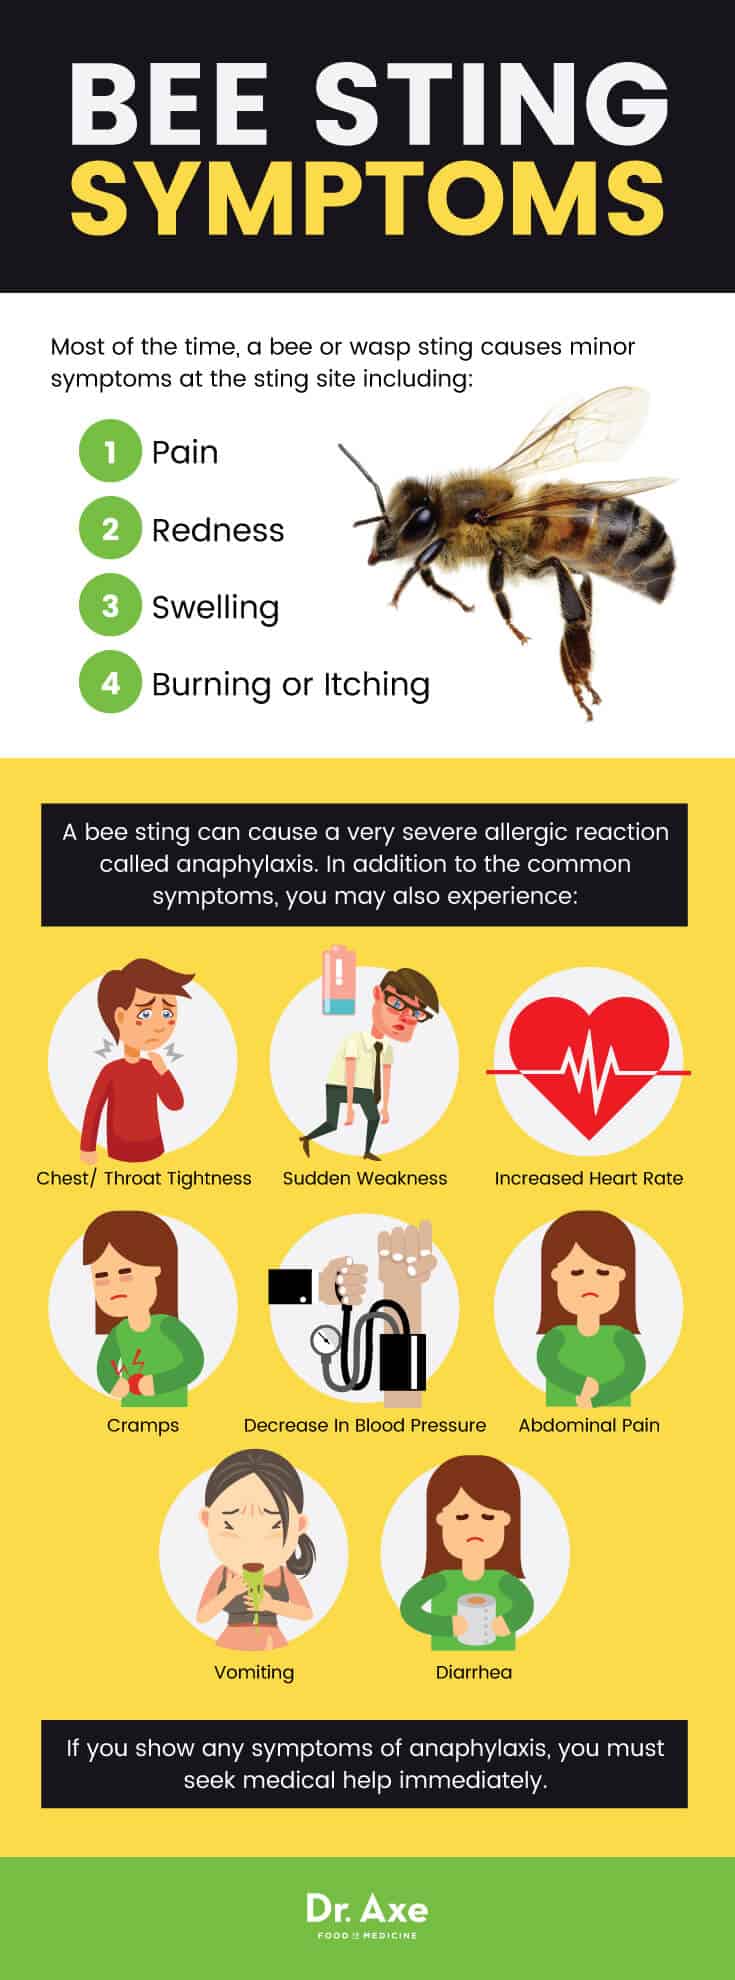 Bee sting treatment: bee sting symptoms - Dr. Axe